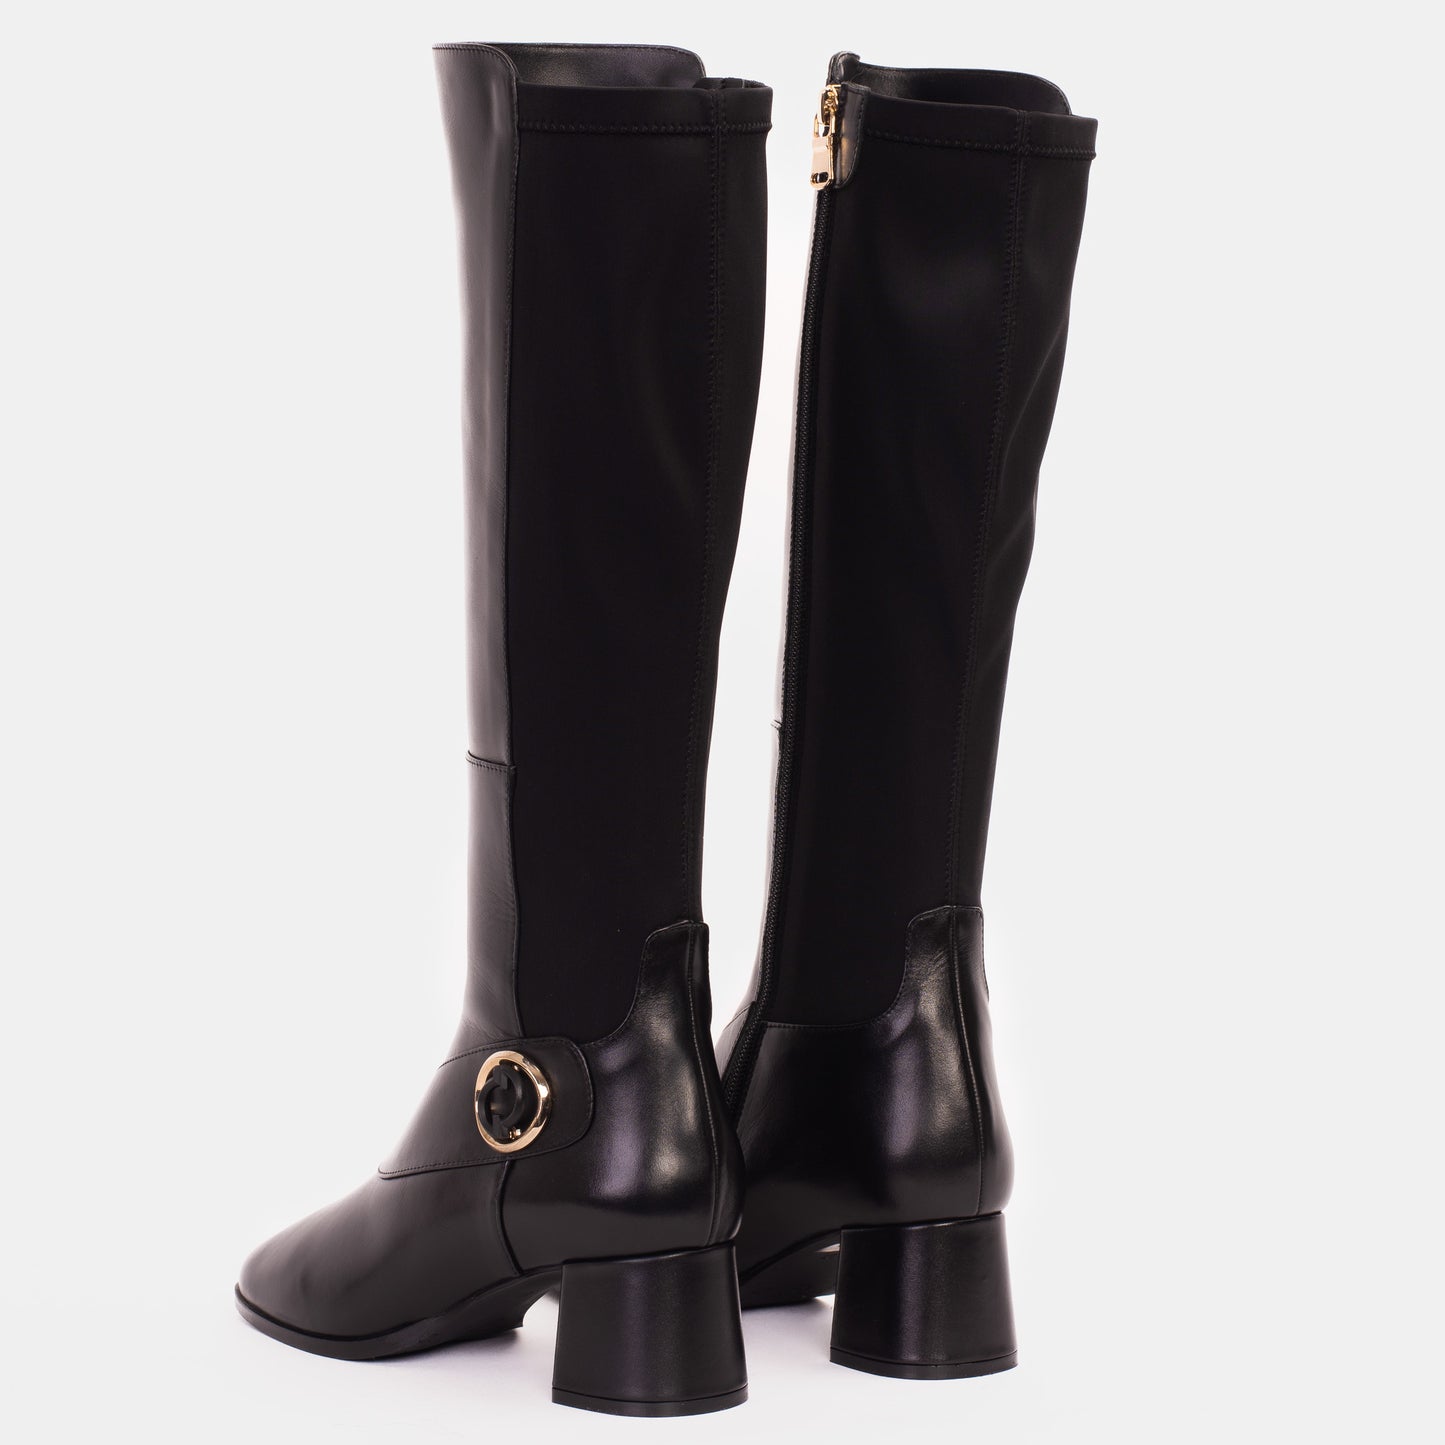 The Windsor Black Leather Knee High Women Boot